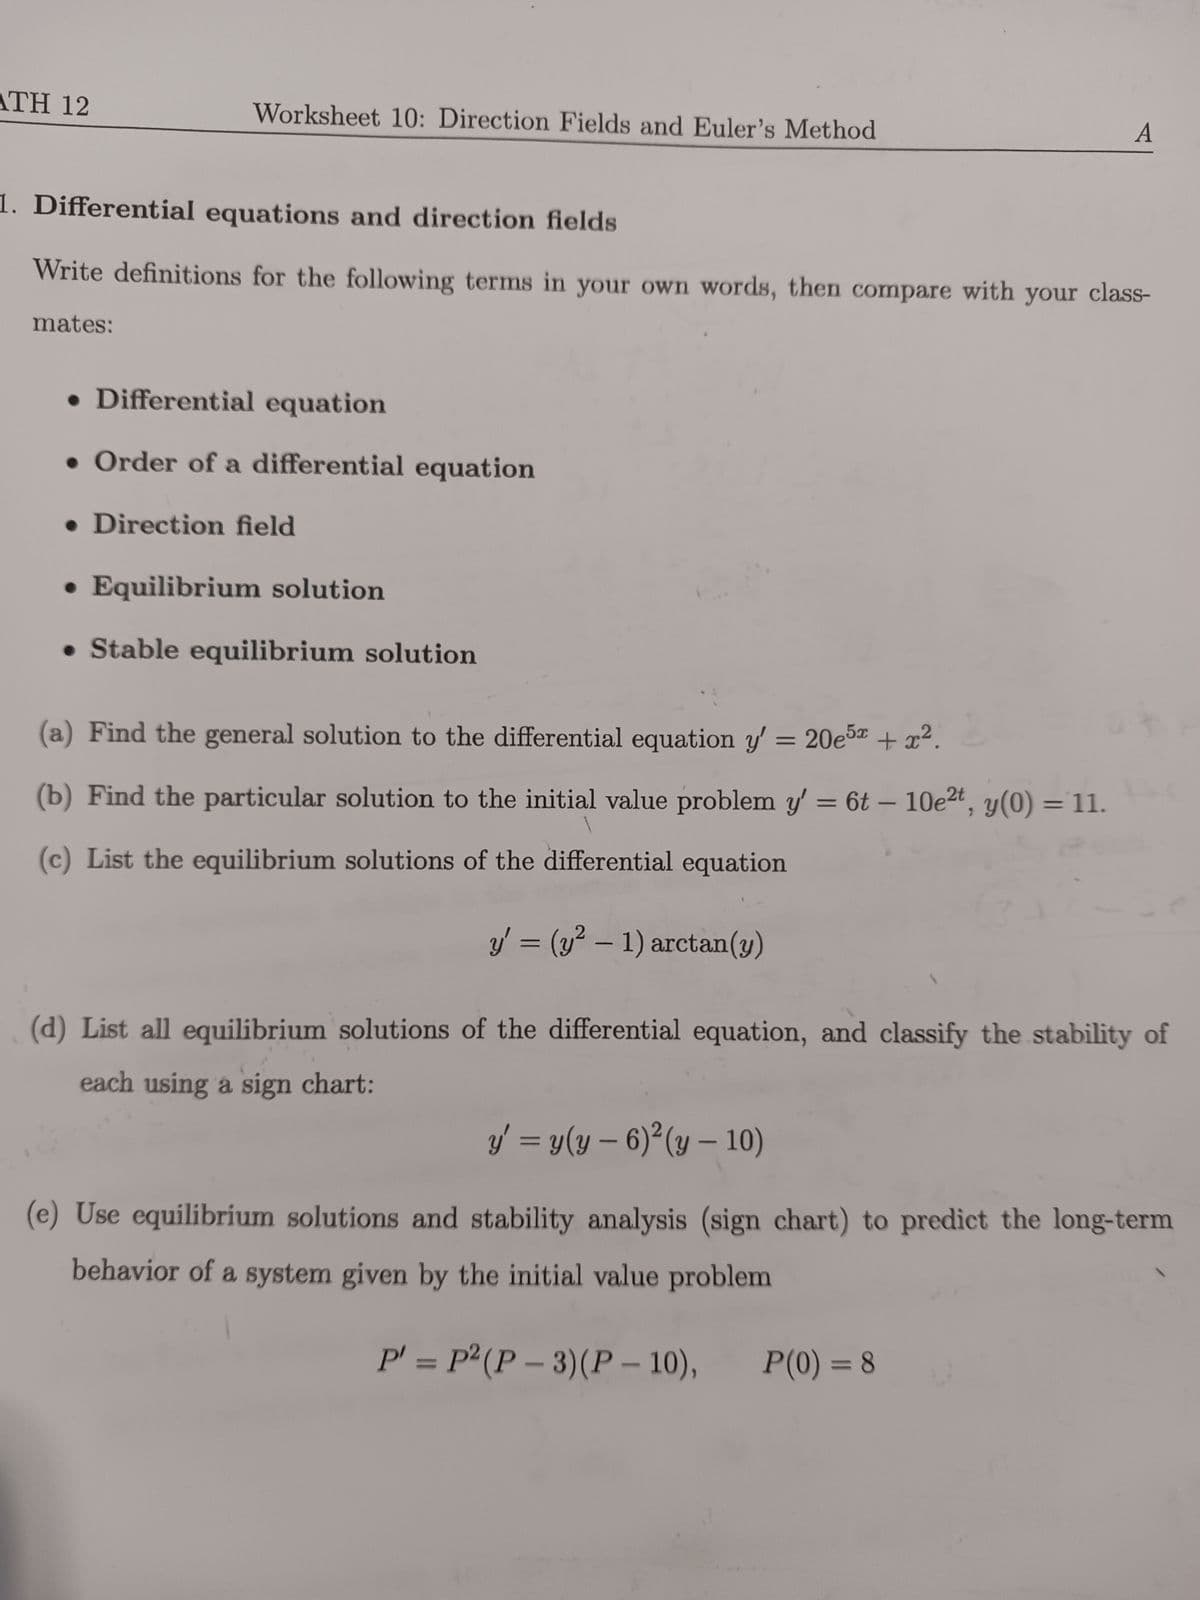 ATH 12
Worksheet 10: Direction Fields and Euler's Method
1. Differential equations and direction fields
Write definitions for the following terms in your own words, then compare with your class-
mates:
• Differential equation
Order of a differential equation
• Direction field
• Equilibrium solution
• Stable equilibrium solution
(a) Find the general solution to the differential equation y' = 20e5x + x².
(b) Find the particular solution to the initial value problem y' = 6t - 10e²t, y(0) = 11.
(c) List the equilibrium solutions of the differential equation
y = (y² - 1) arctan(y)
A
(d) List all equilibrium solutions of the differential equation, and classify the stability of
each using a sign chart:
y' = y(y - 6)²(y - 10)
(e) Use equilibrium solutions and stability analysis (sign chart) to predict the long-term
behavior of a system given by the initial value problem
P' = P² (P-3) (P-10),
P(0) = 8